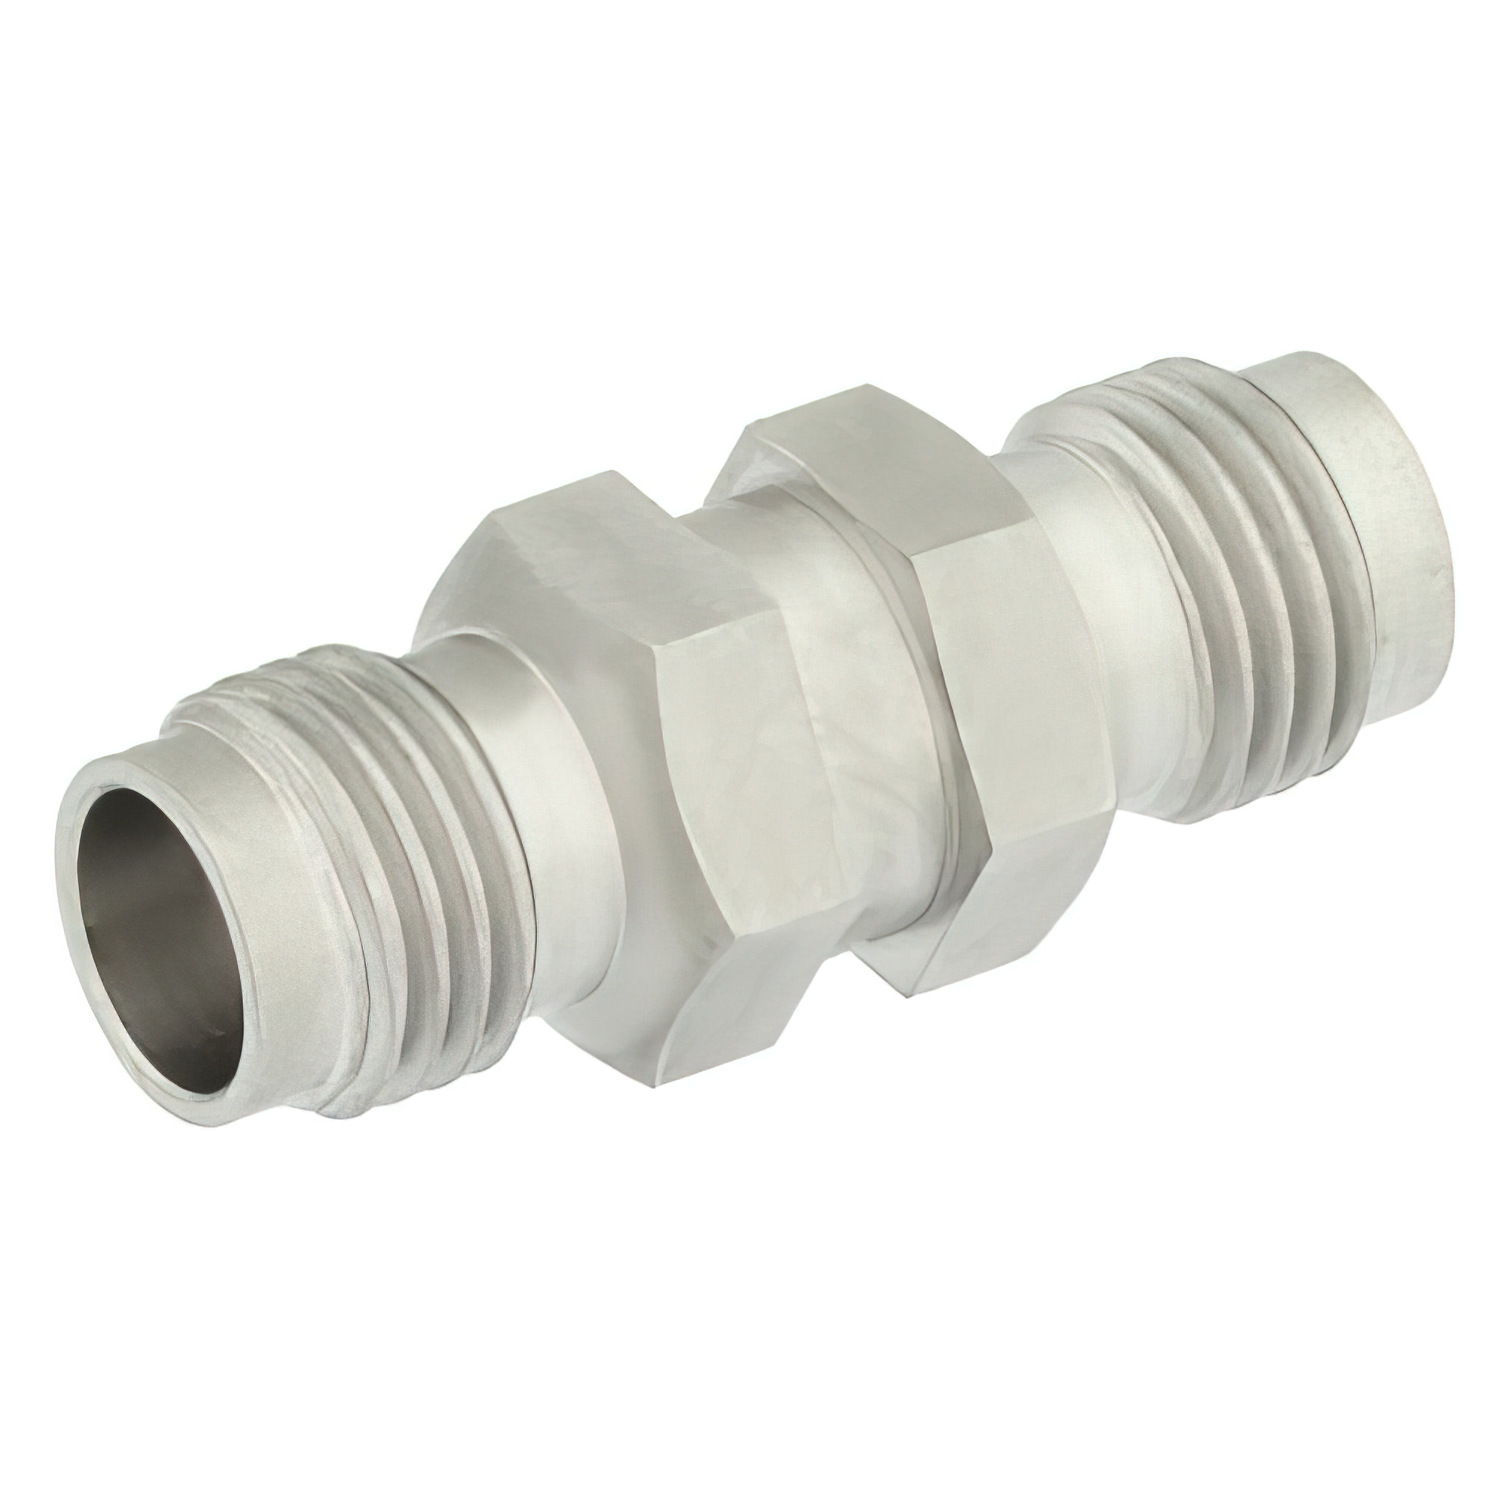 1.85mm Female to 1.85mm Female Adapter1